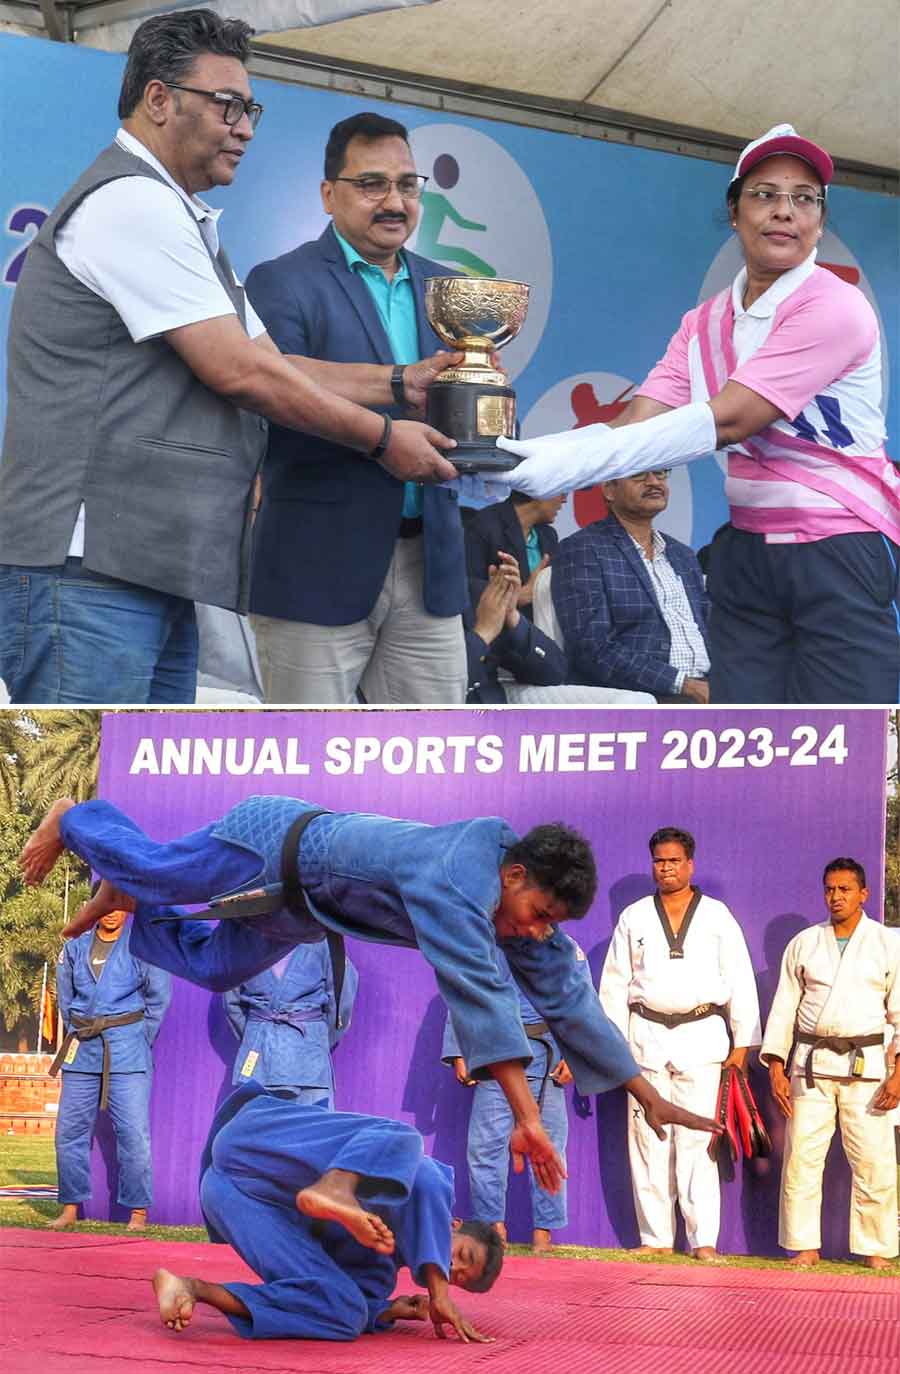 The Kolkata Police Annual Sports Meet 2023-2024 ended with a closing ceremony on Sunday at the Alipore Bodyguard Line  